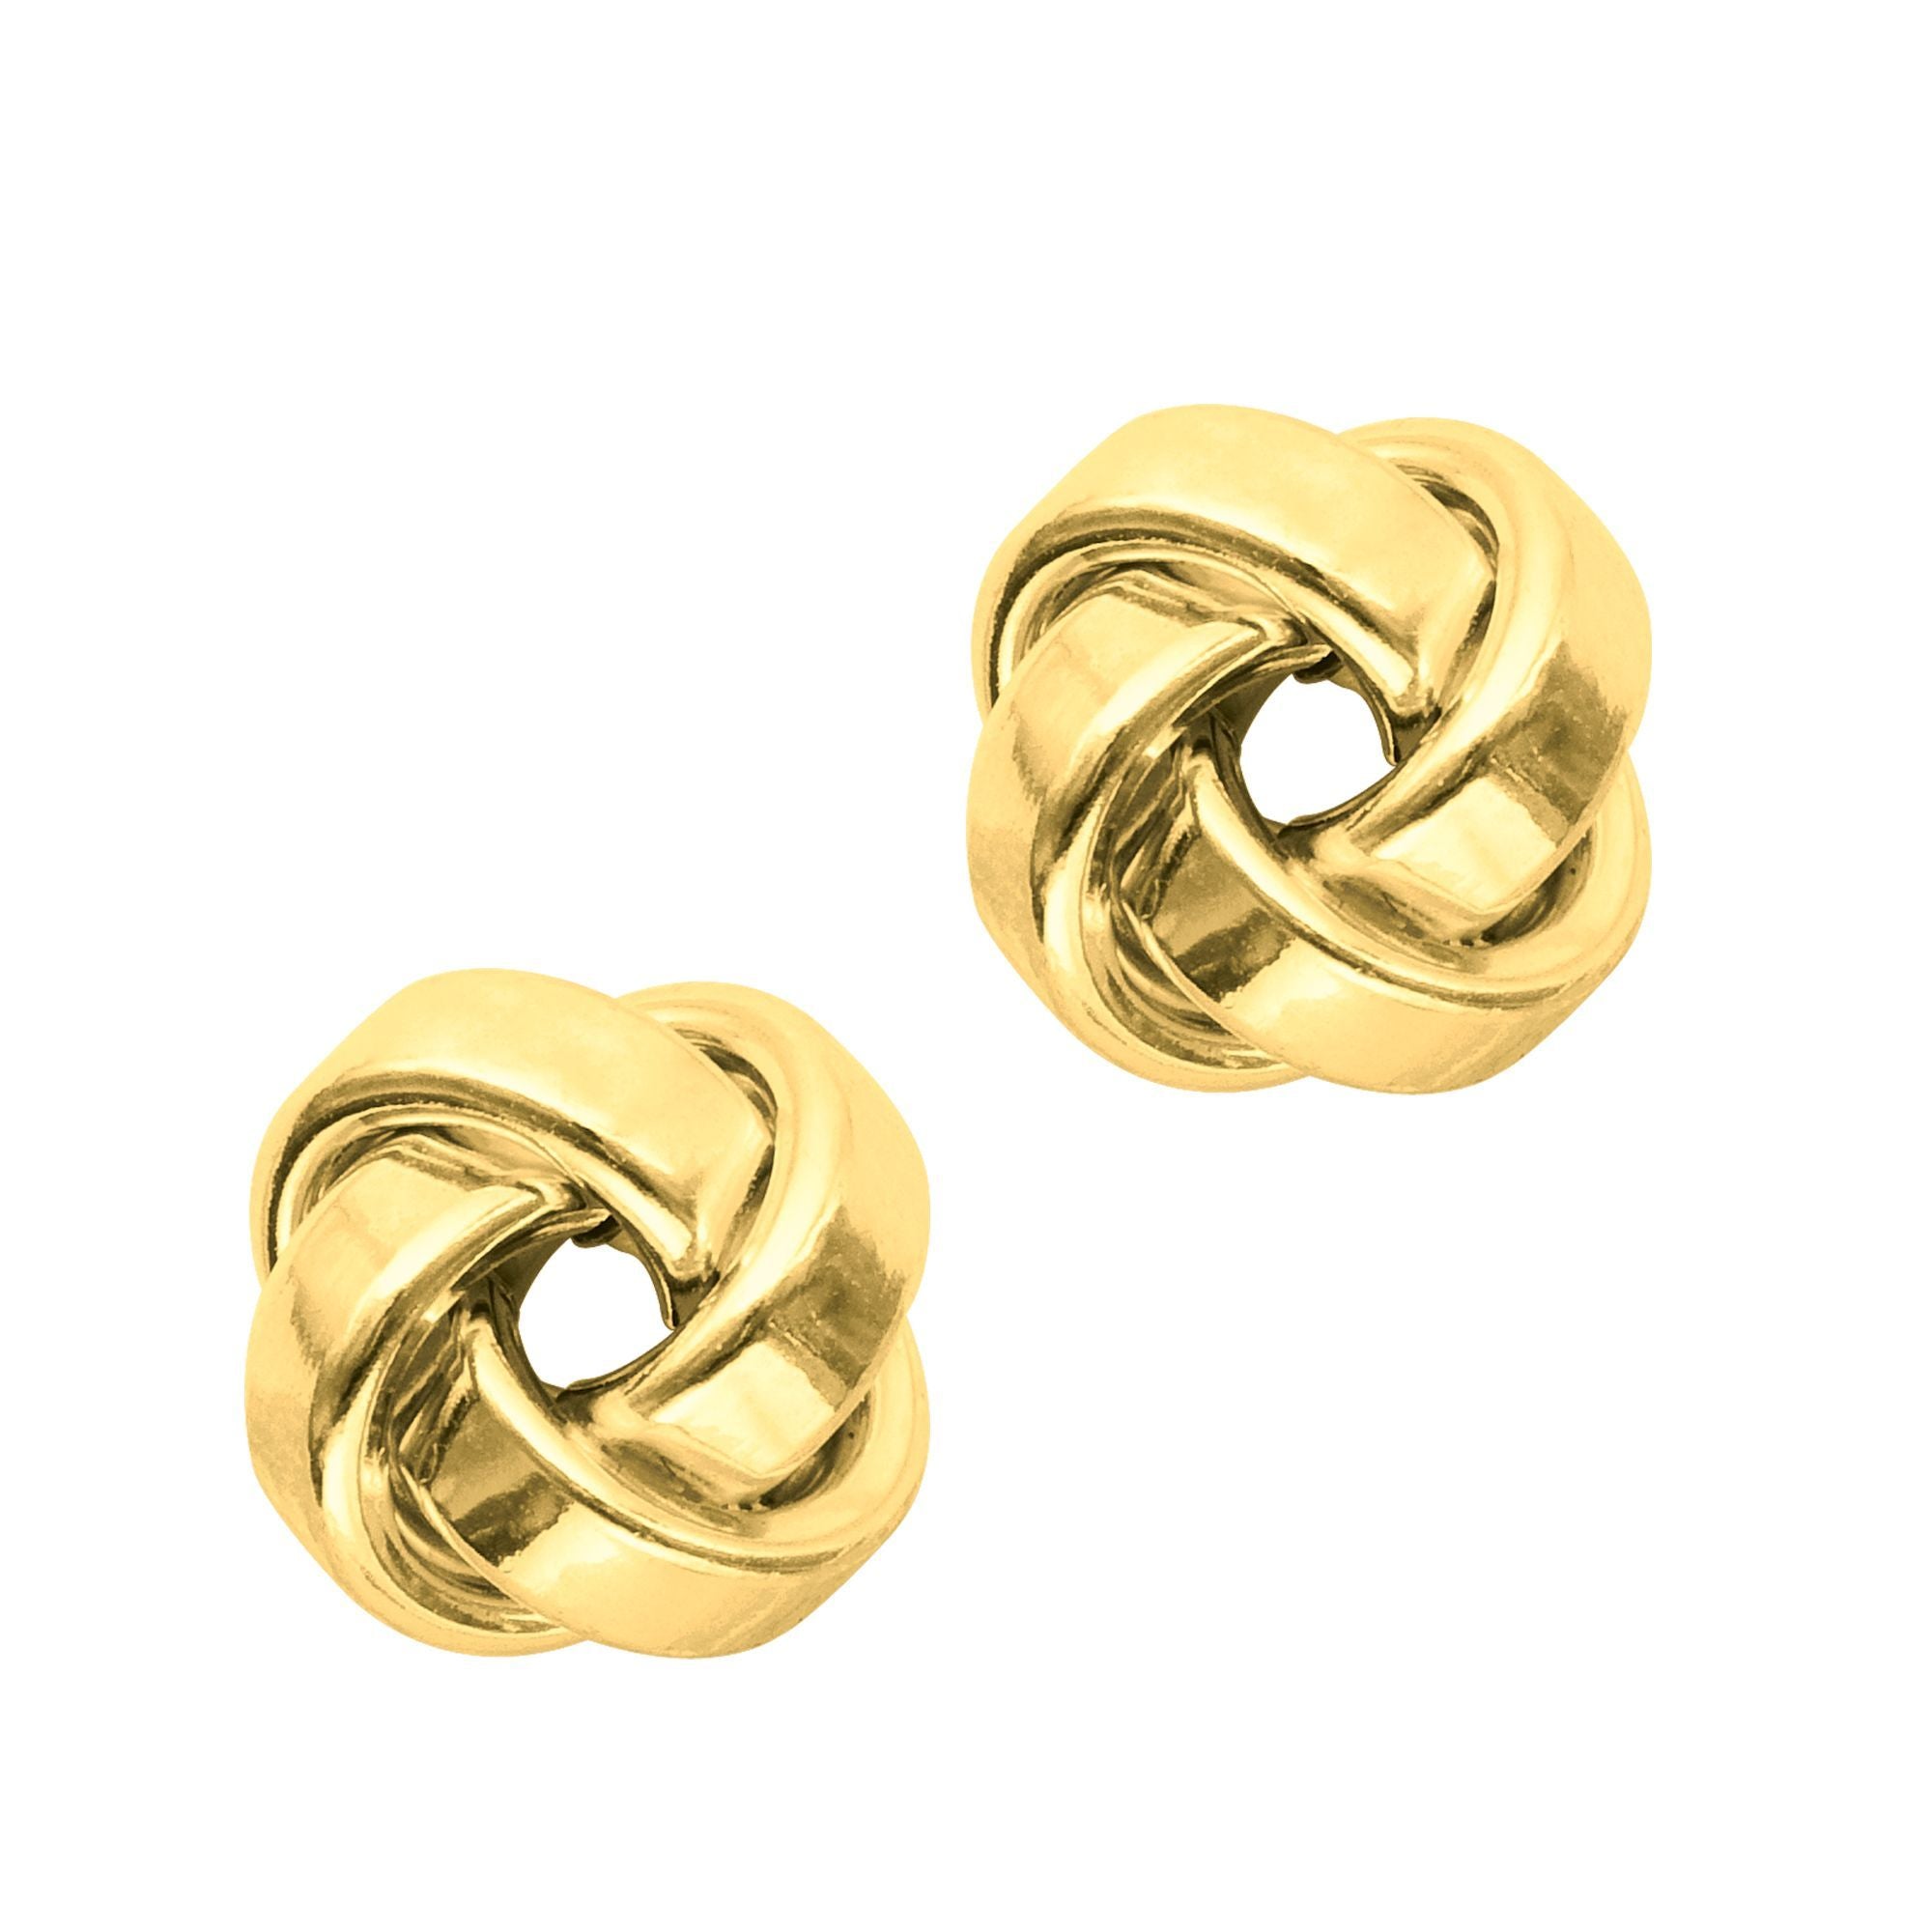 Minimalist Shiny One Row Tube Love Knot Stud Push Back Earrings made of 14k Solid Gold - wingroupjewelry